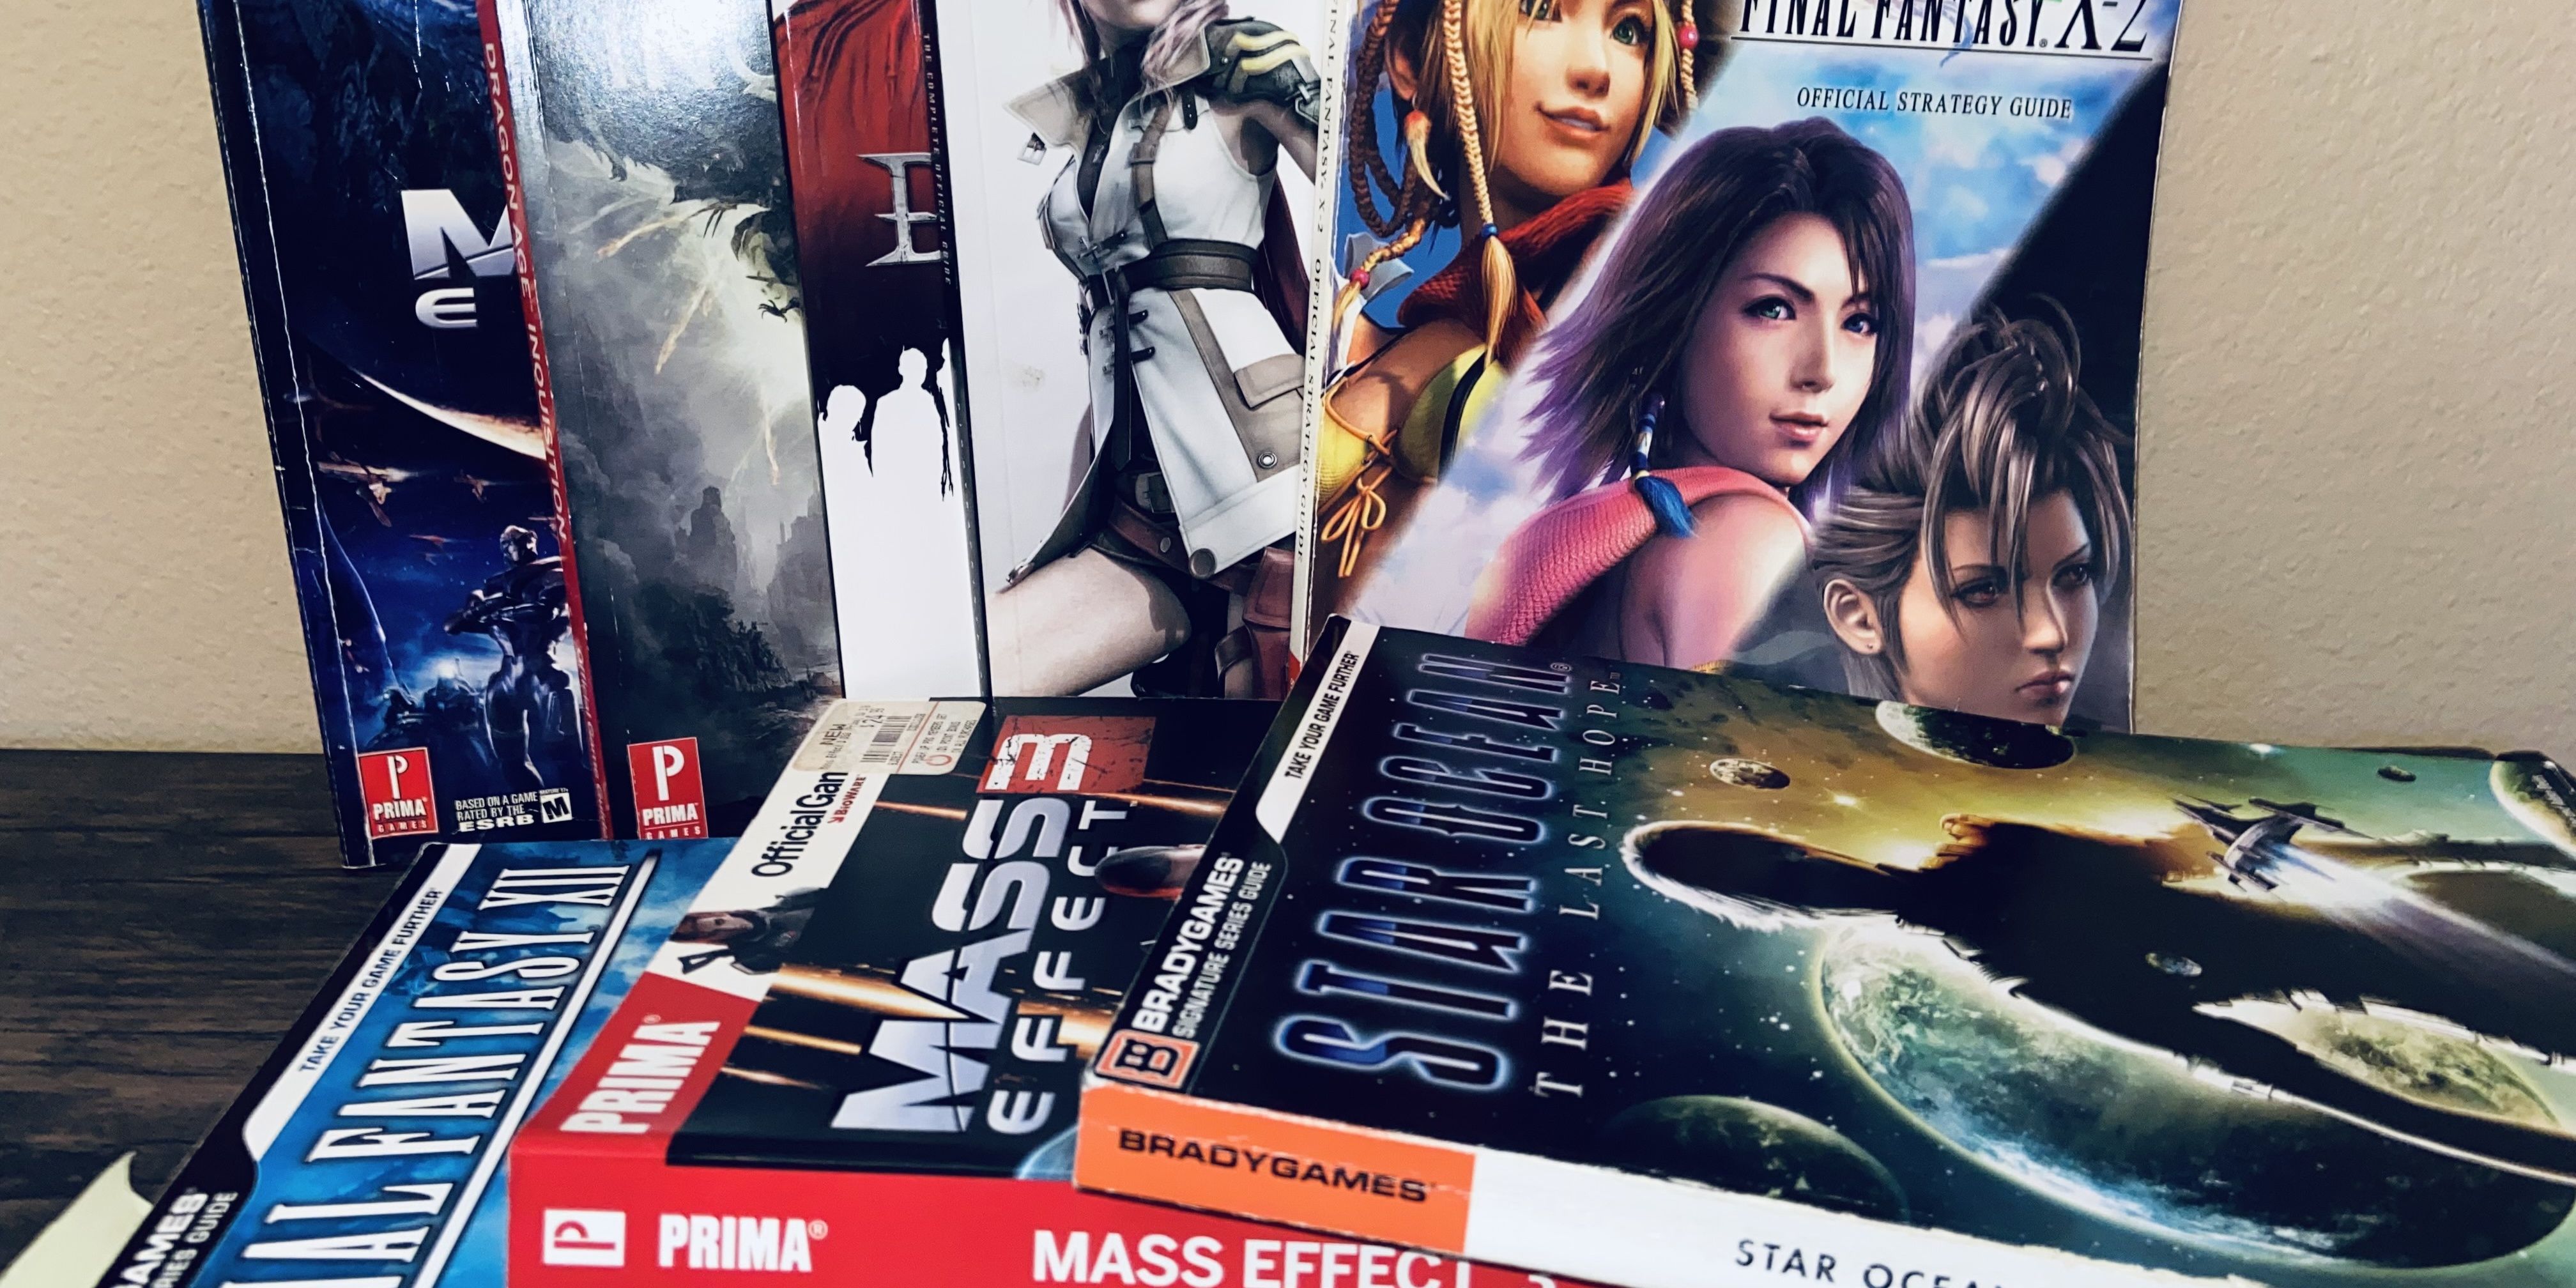 Final Fantasy X-2 and Mass Effect among printed other strategy guides